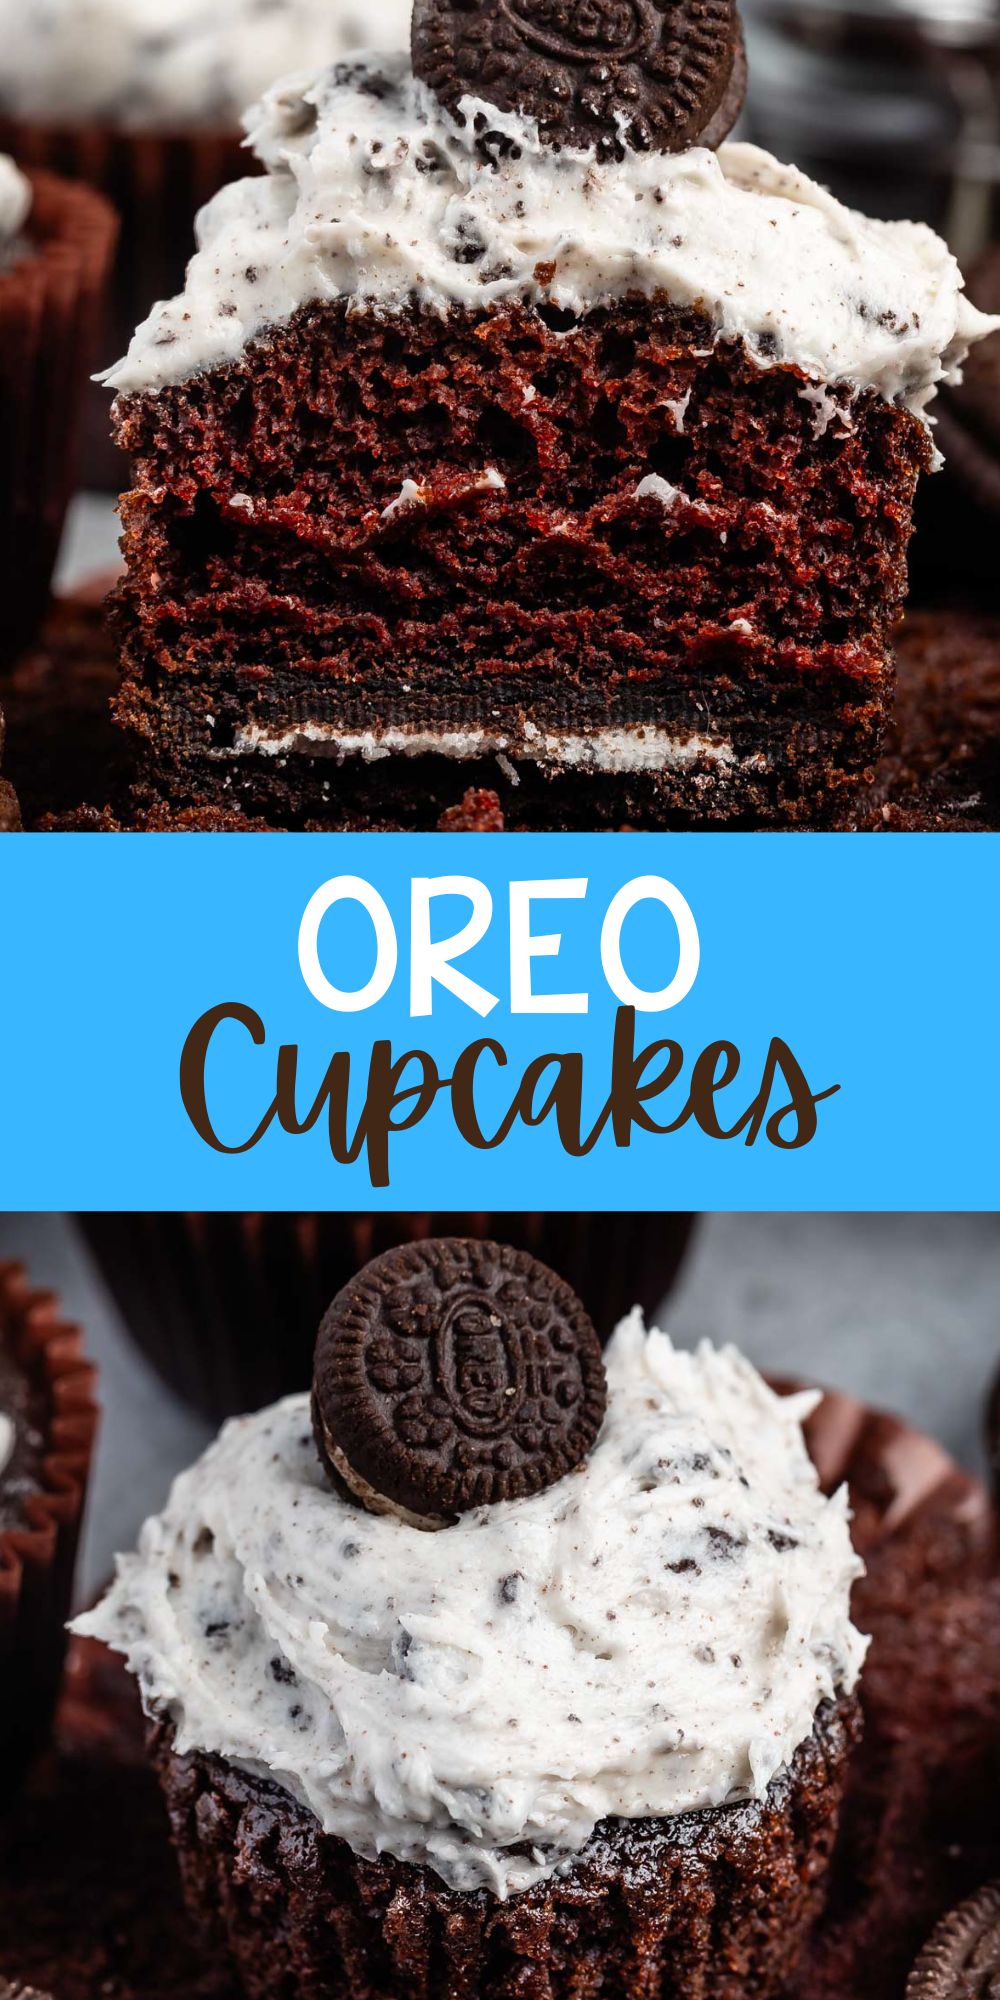 two photos of chocolate cupcake split in half with white Oreo frosting and a mini Oreo on top with words on the image.